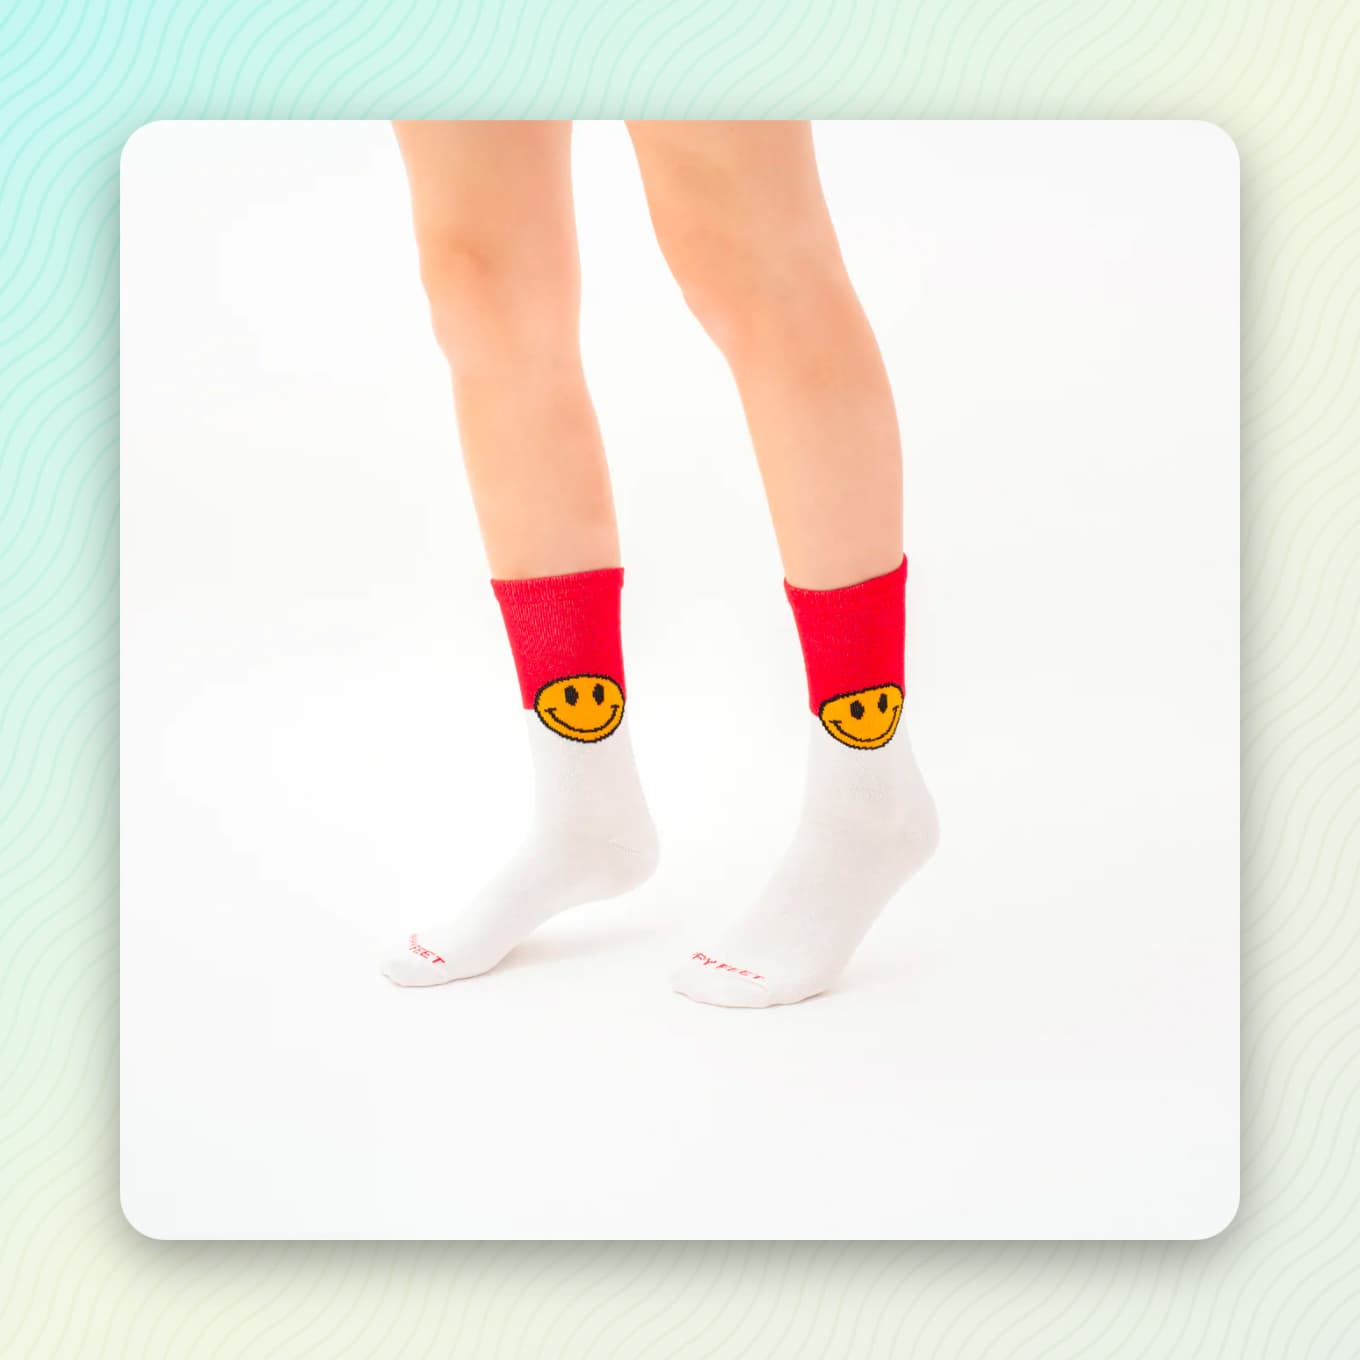 White and red socks with yellow smiley faces on them